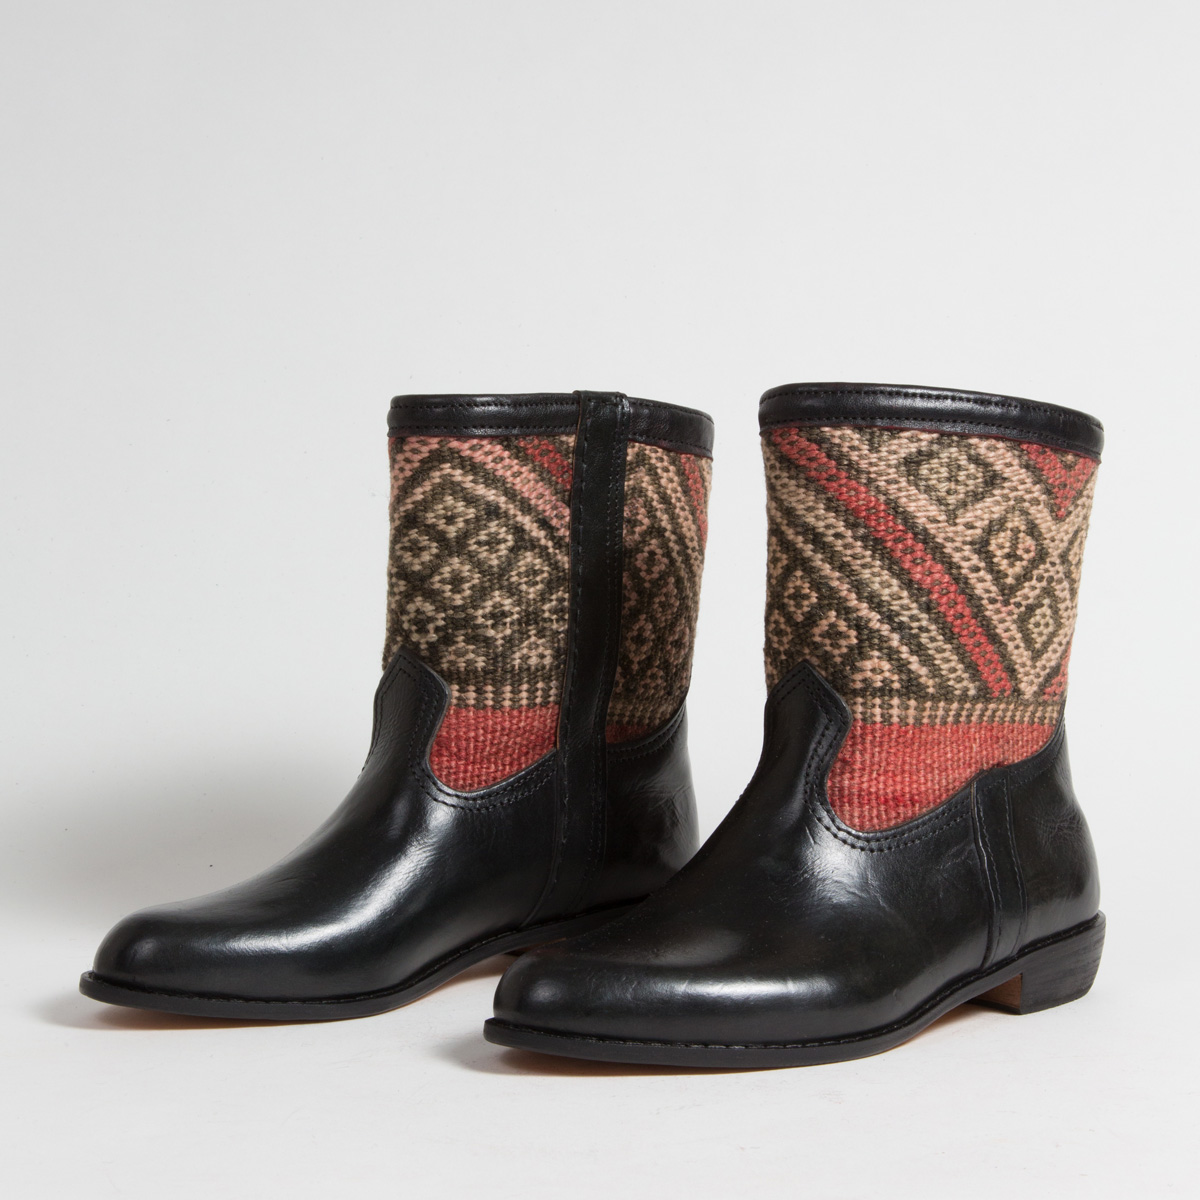 Bottines Kilim cuir mababouche artisanales (Réf. RPN26-41)